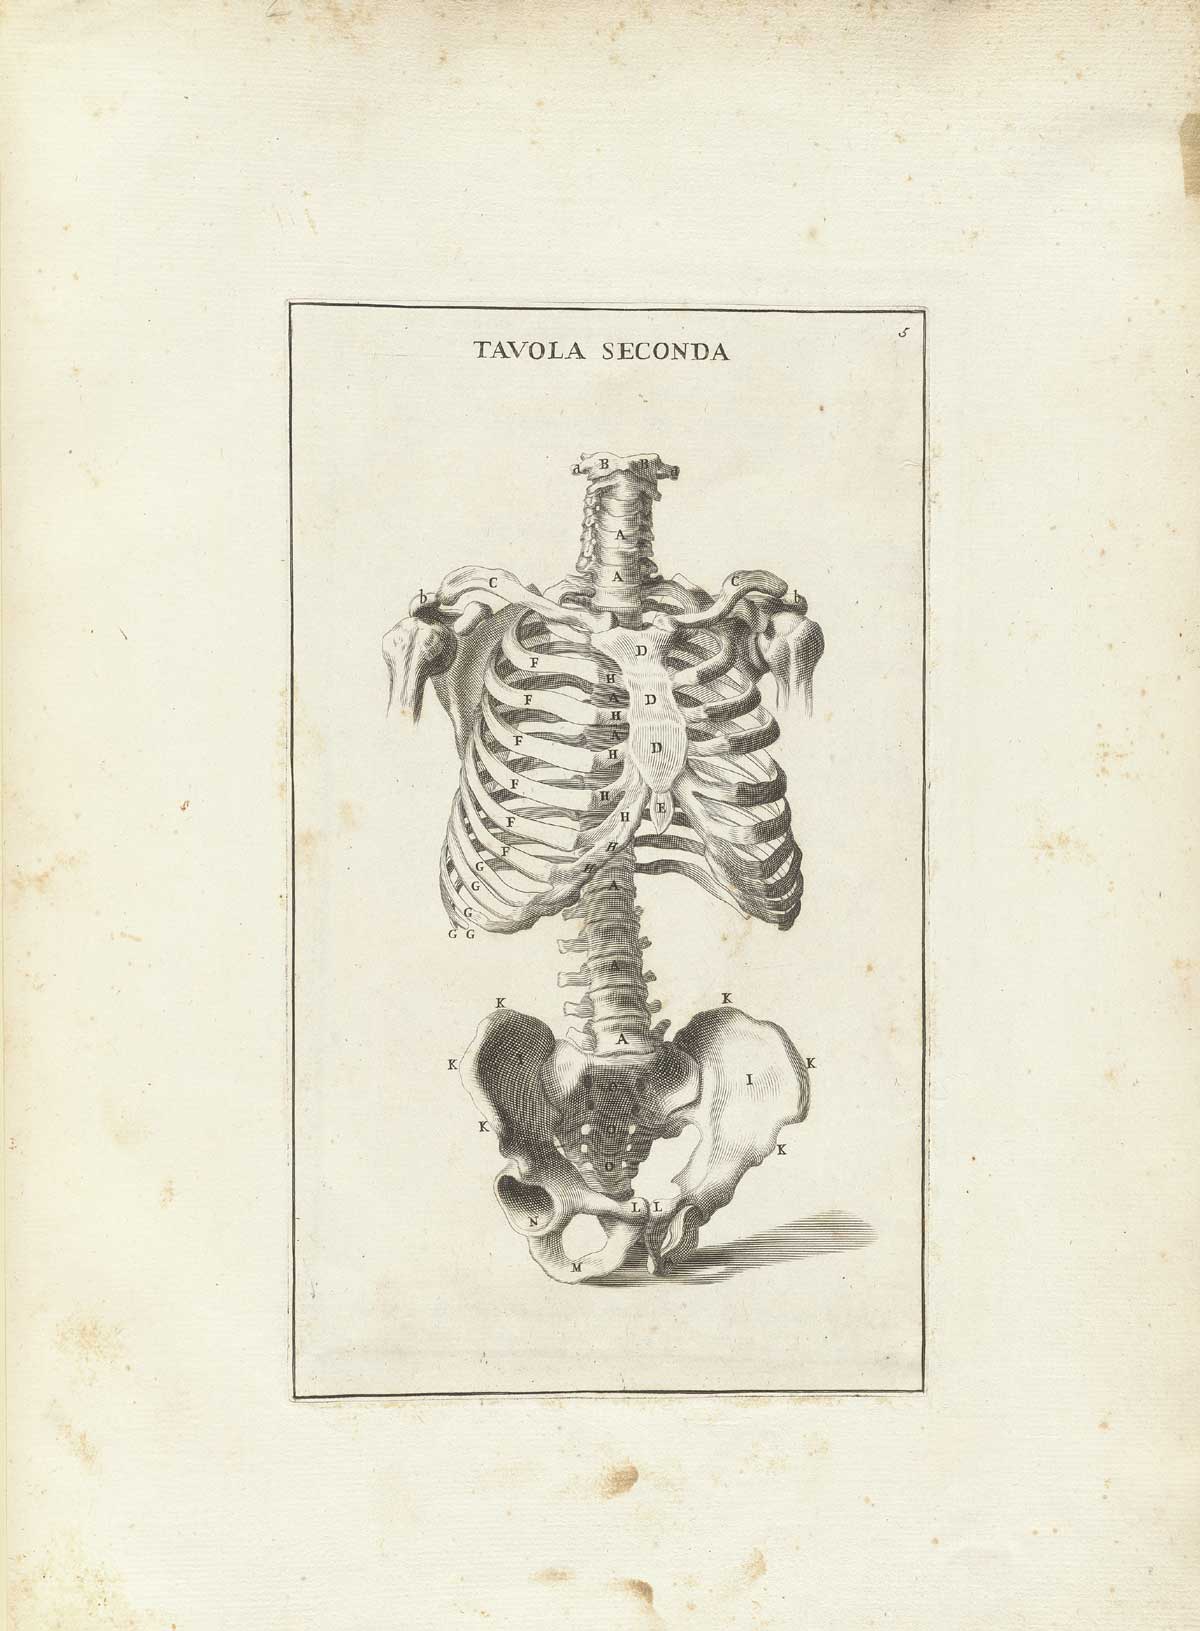 Engraving of a skeleton without head or limbs, focusing on the ribcage, spinal column and pelvis, facing the viewer but tilted about 45 degrees to the right; from Bernardino Genga’s Anatomia per uso et intelligenza del disegno, NLM Call no.: WZ 250 G329an 1691.